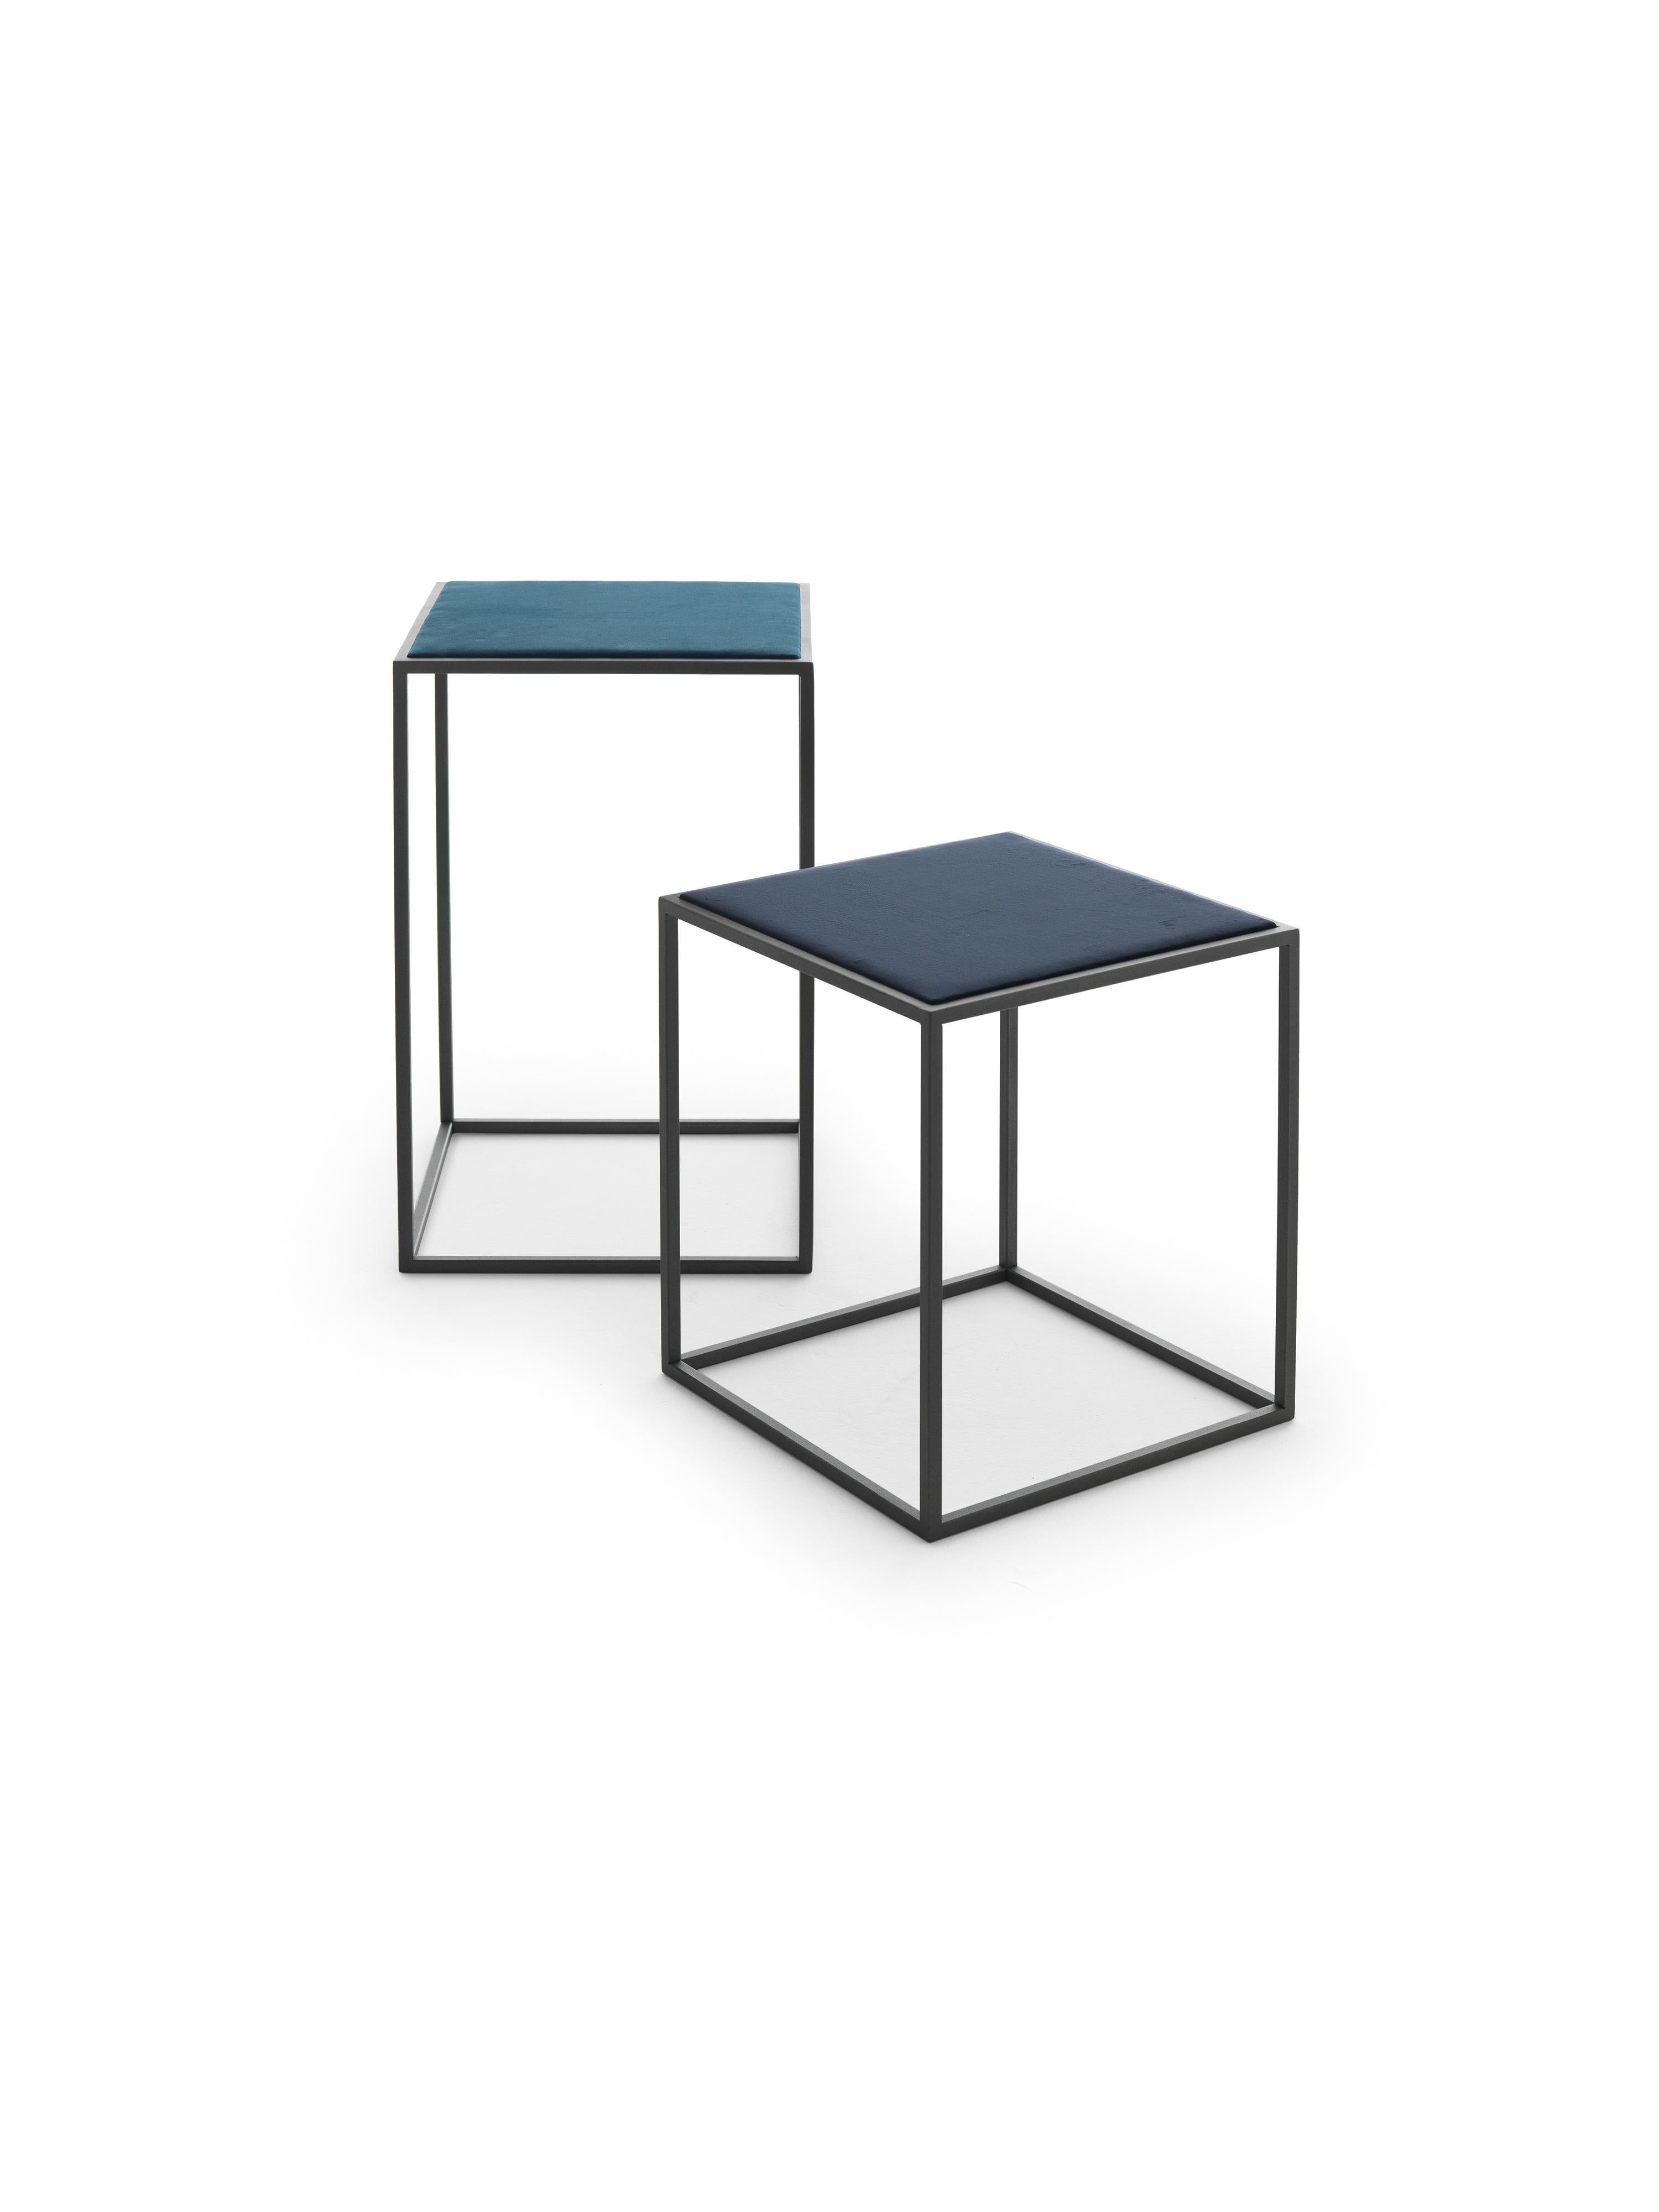 The Gotham side table/nightstand is simple, compact, rich and soft all at once. The base is made with a very thin squared metal tubing which results in a physically and visually light geometric structure. The top is upholstered in velvet to create a